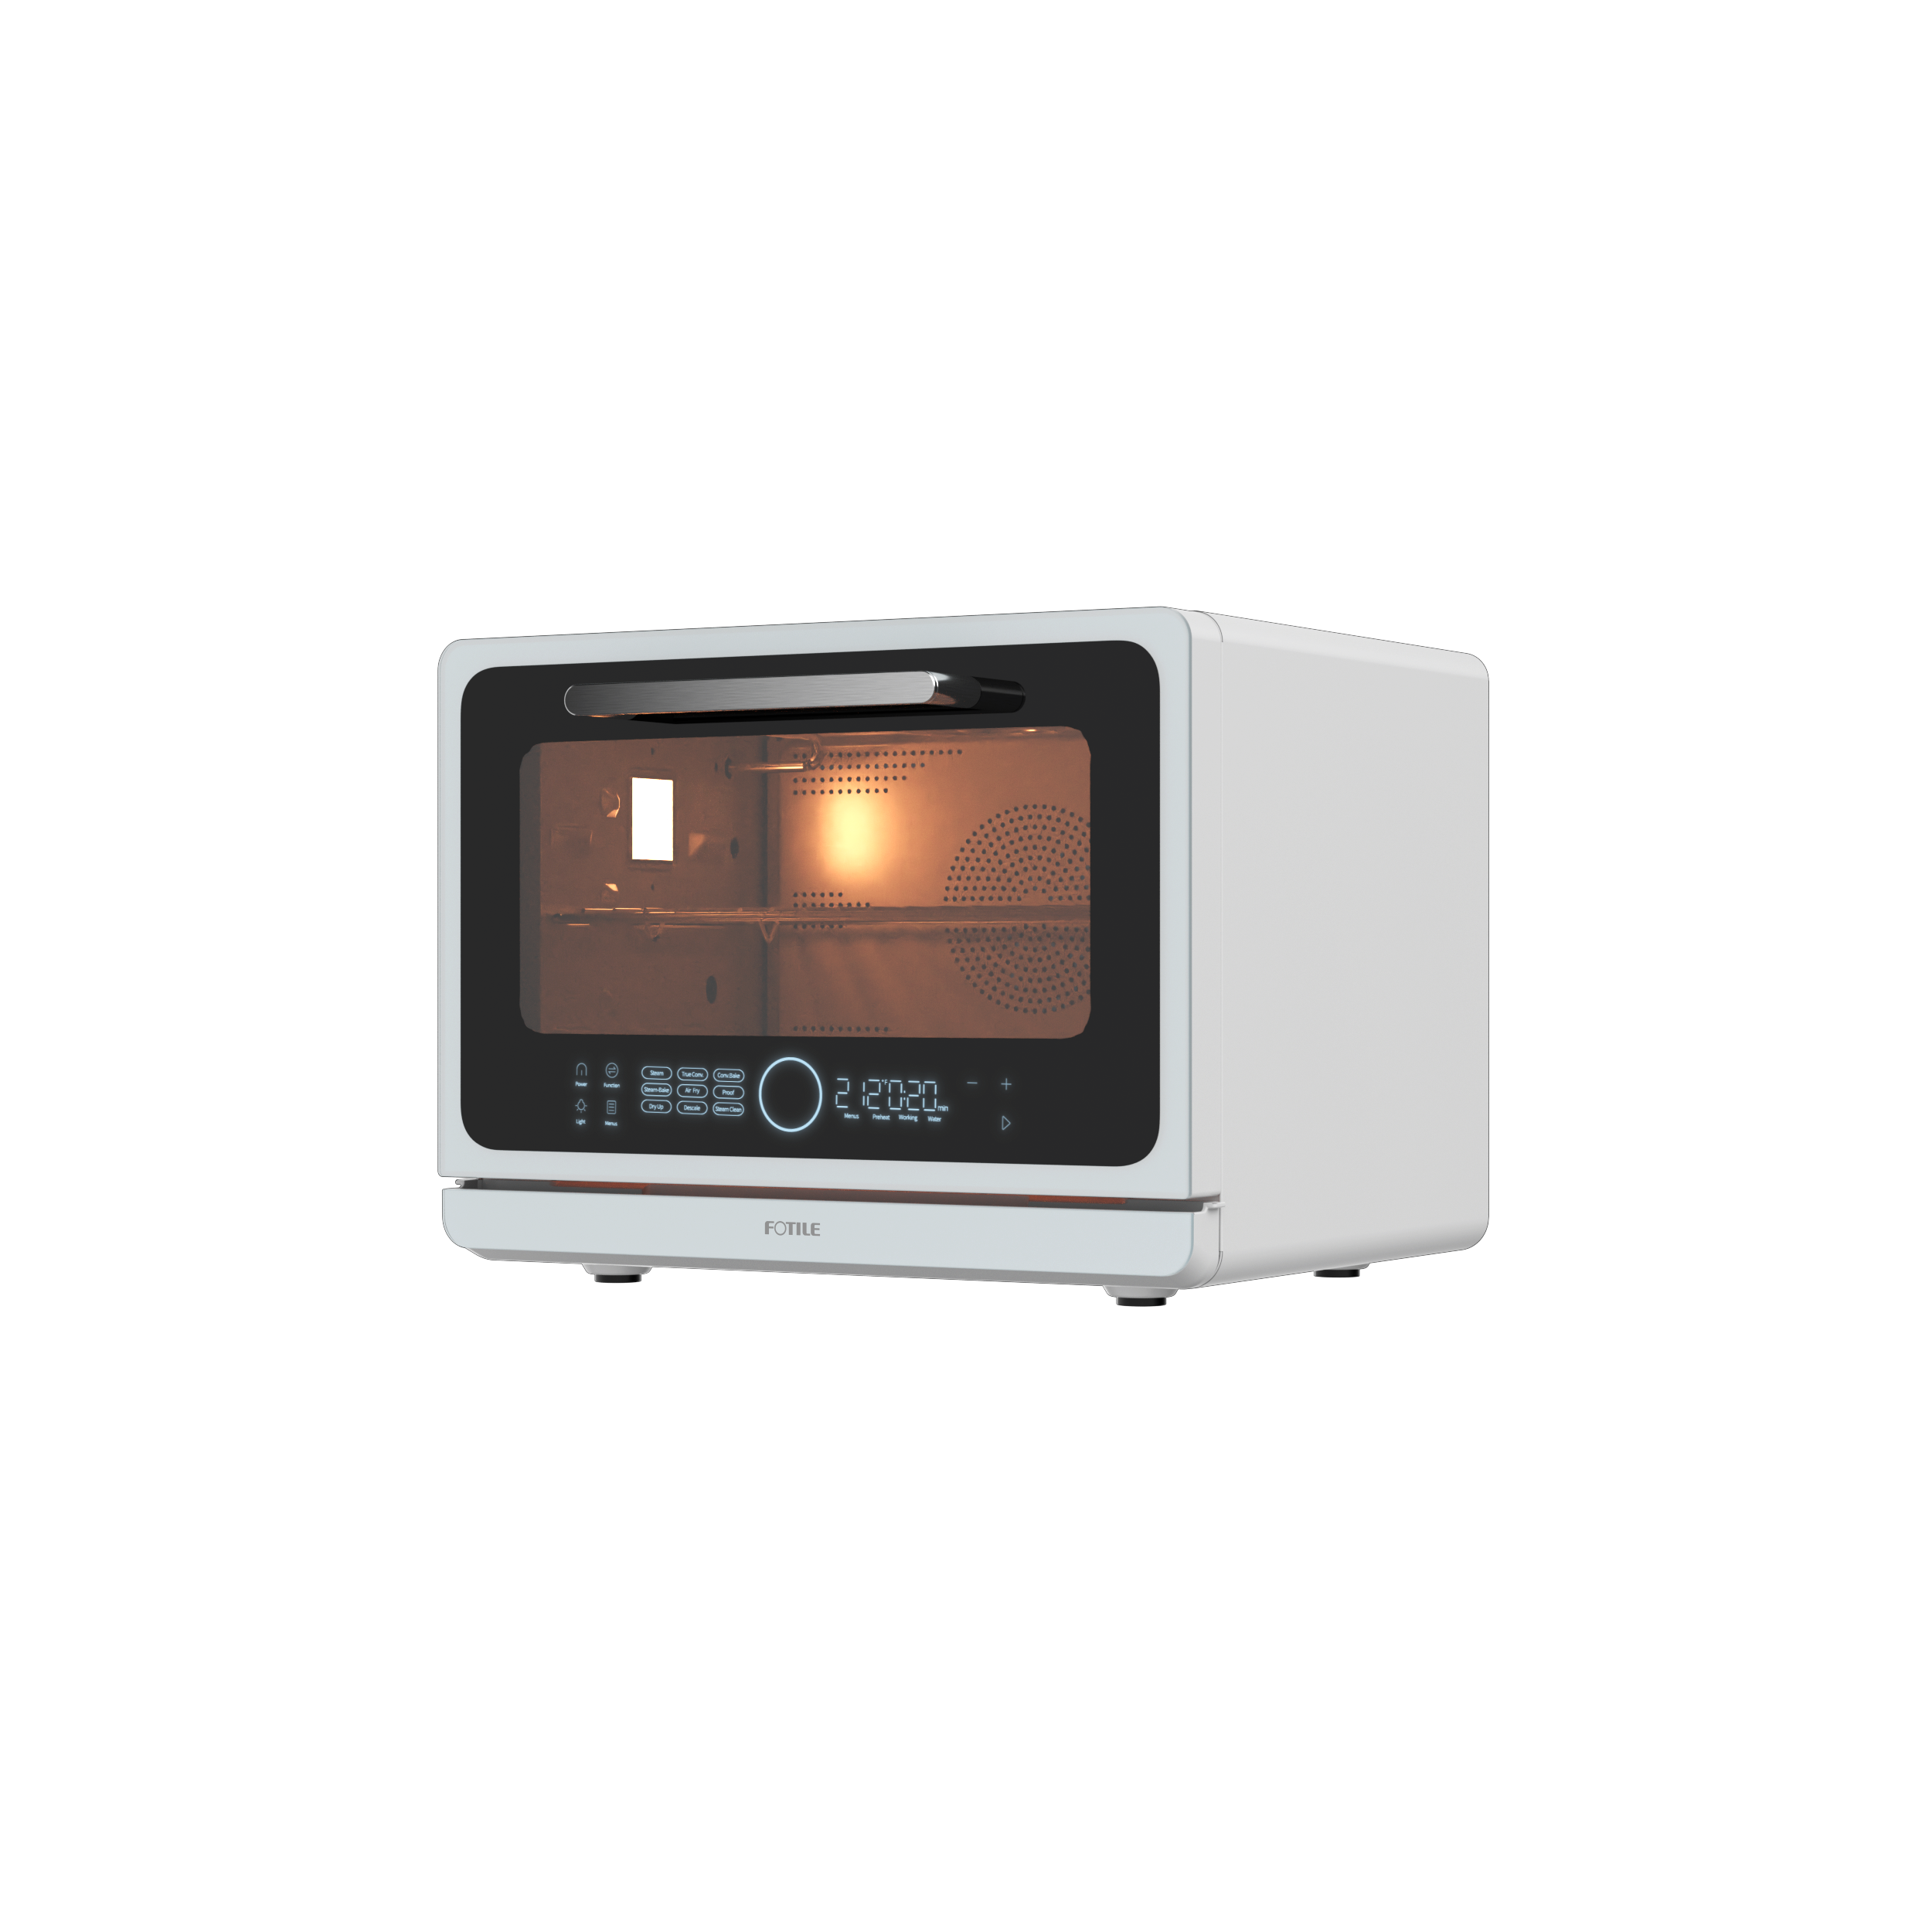 Buy online Stylish & High Quality ChefCubii™ Series HYZK26-E2 | Buy Family-oriented Appliances. - FOTILE